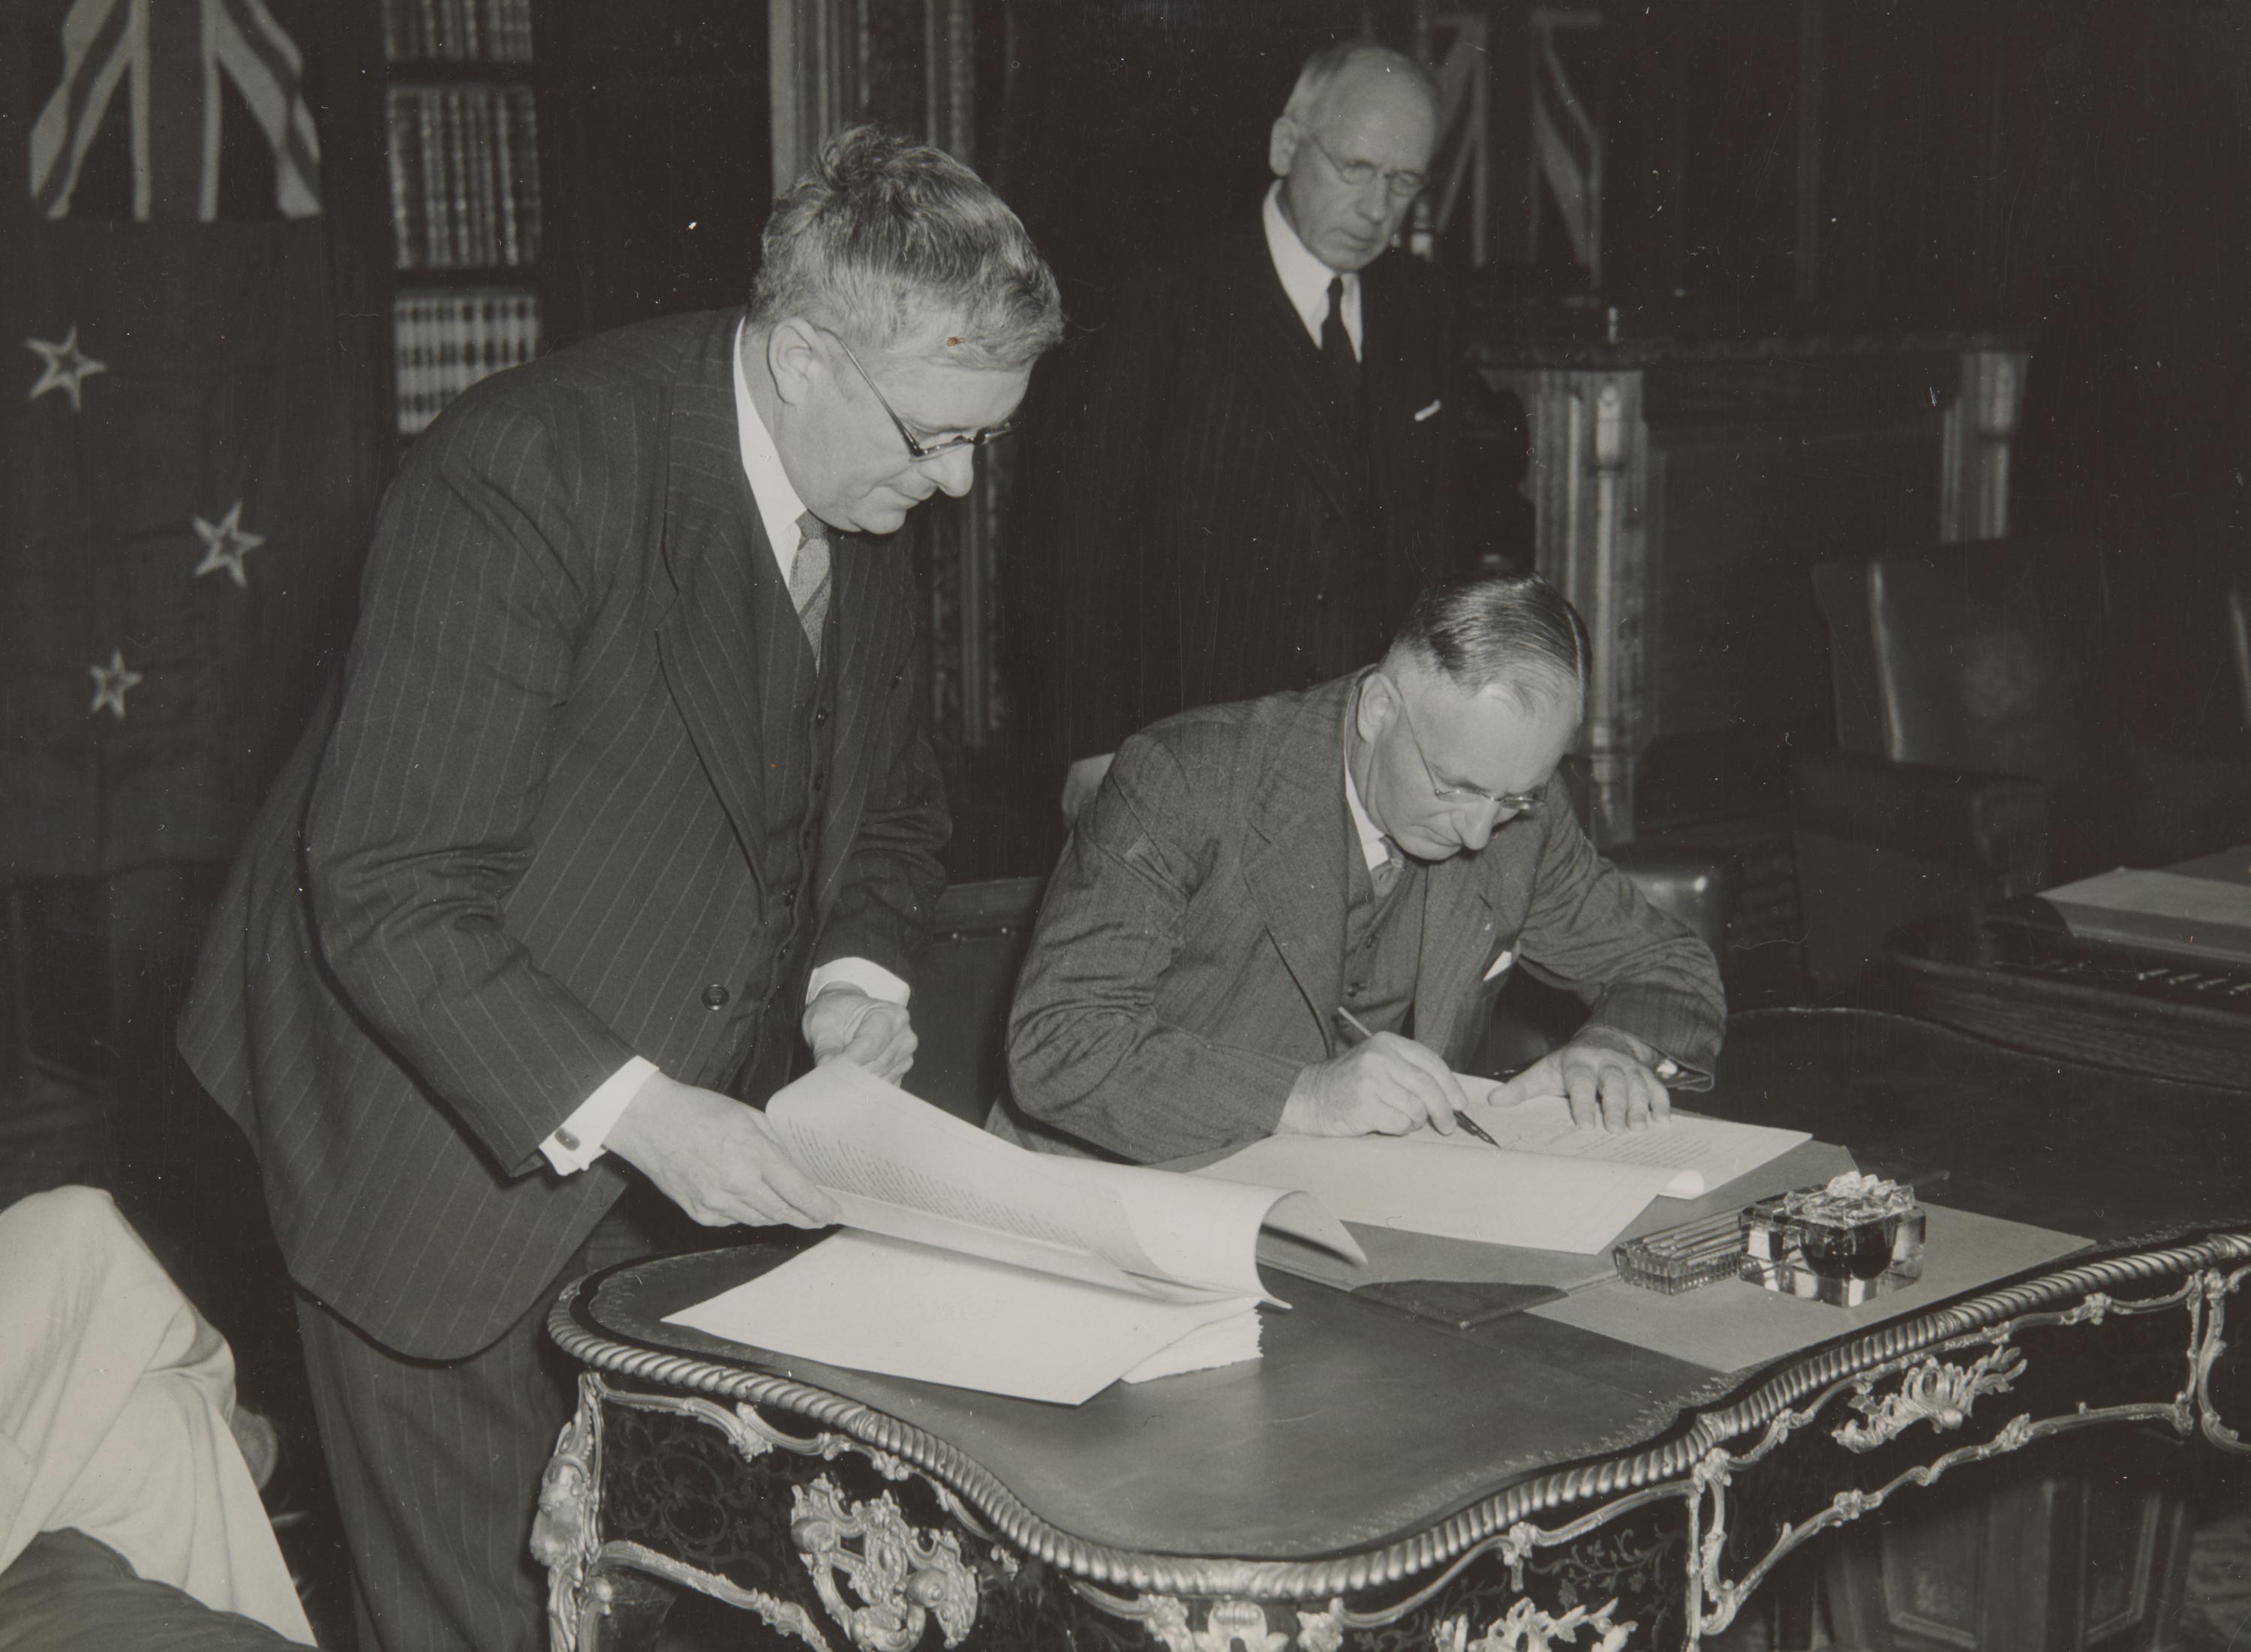 Signing of the historic Australia and New Zealand security pact on 21 January 1944.